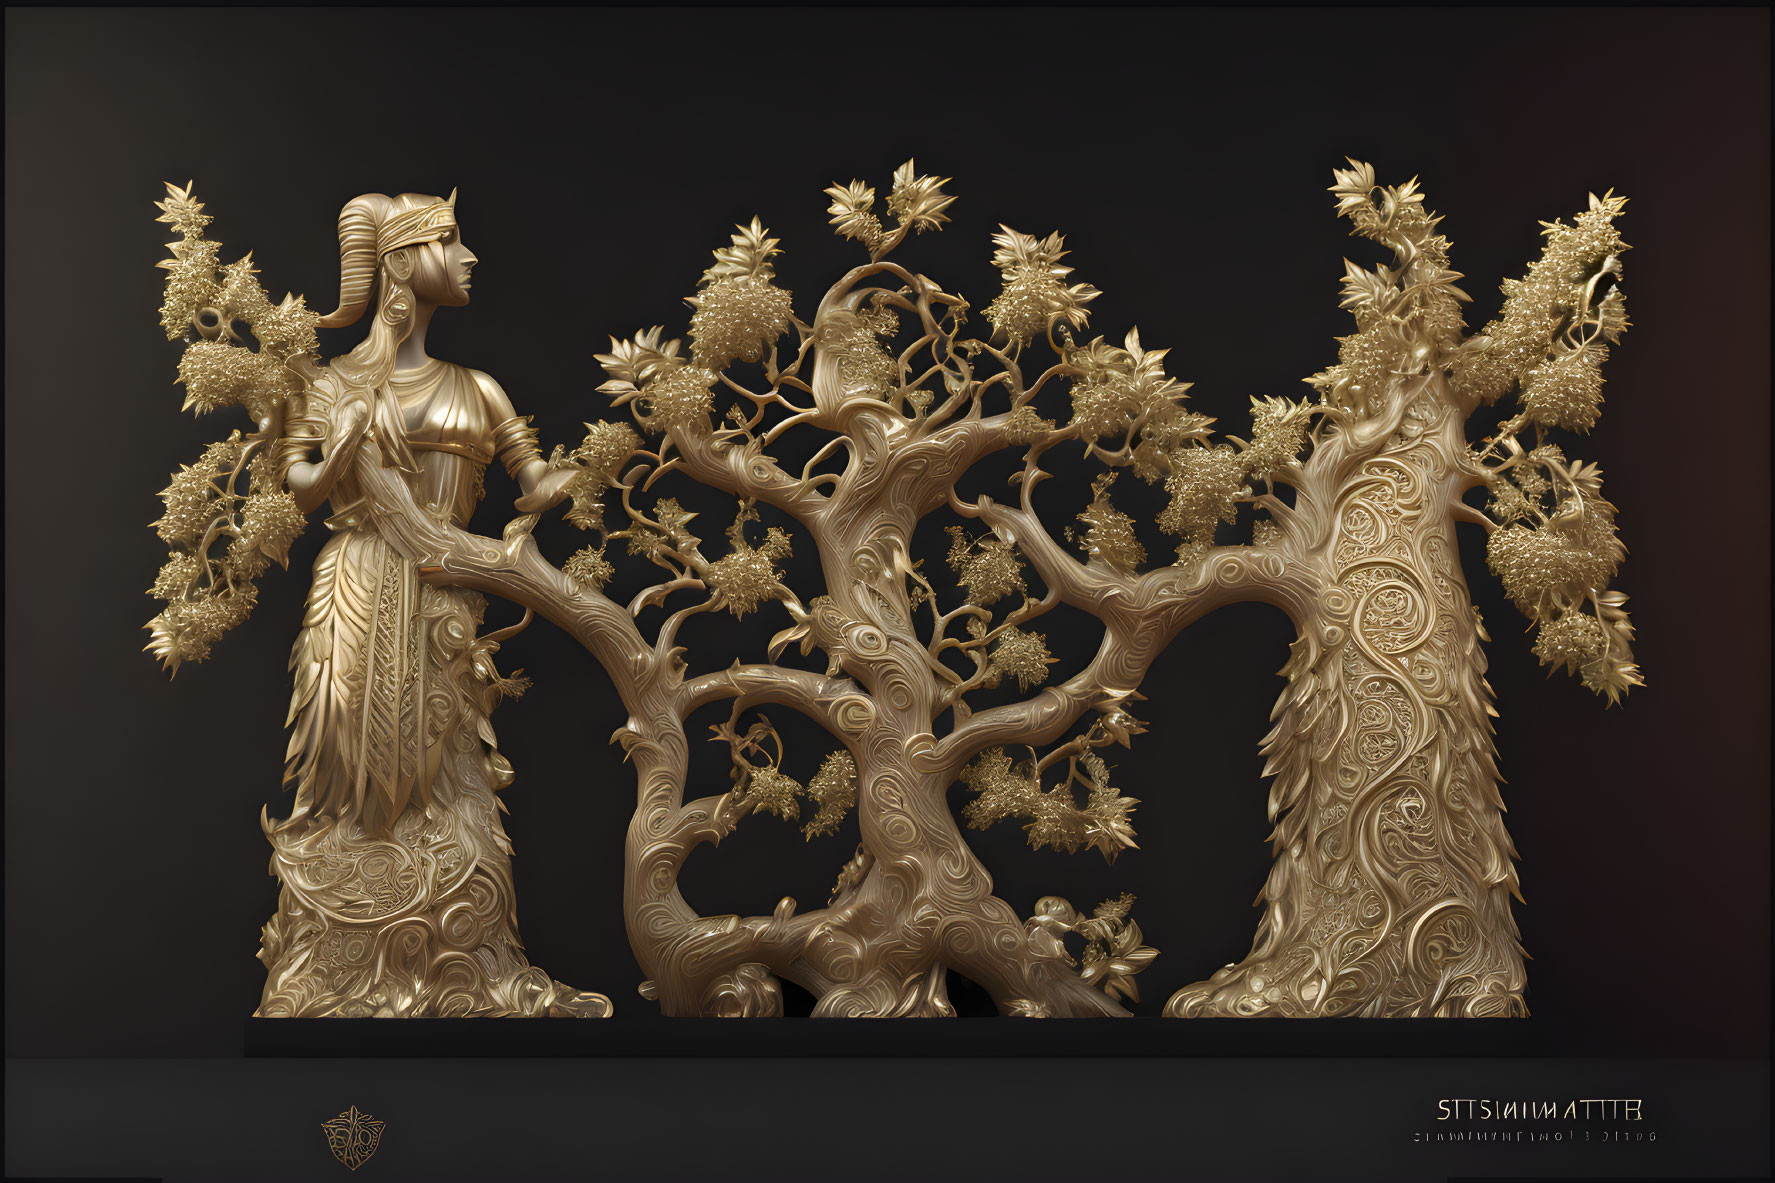 Intricate sculpture of woman blending with tree, golden details on dark backdrop